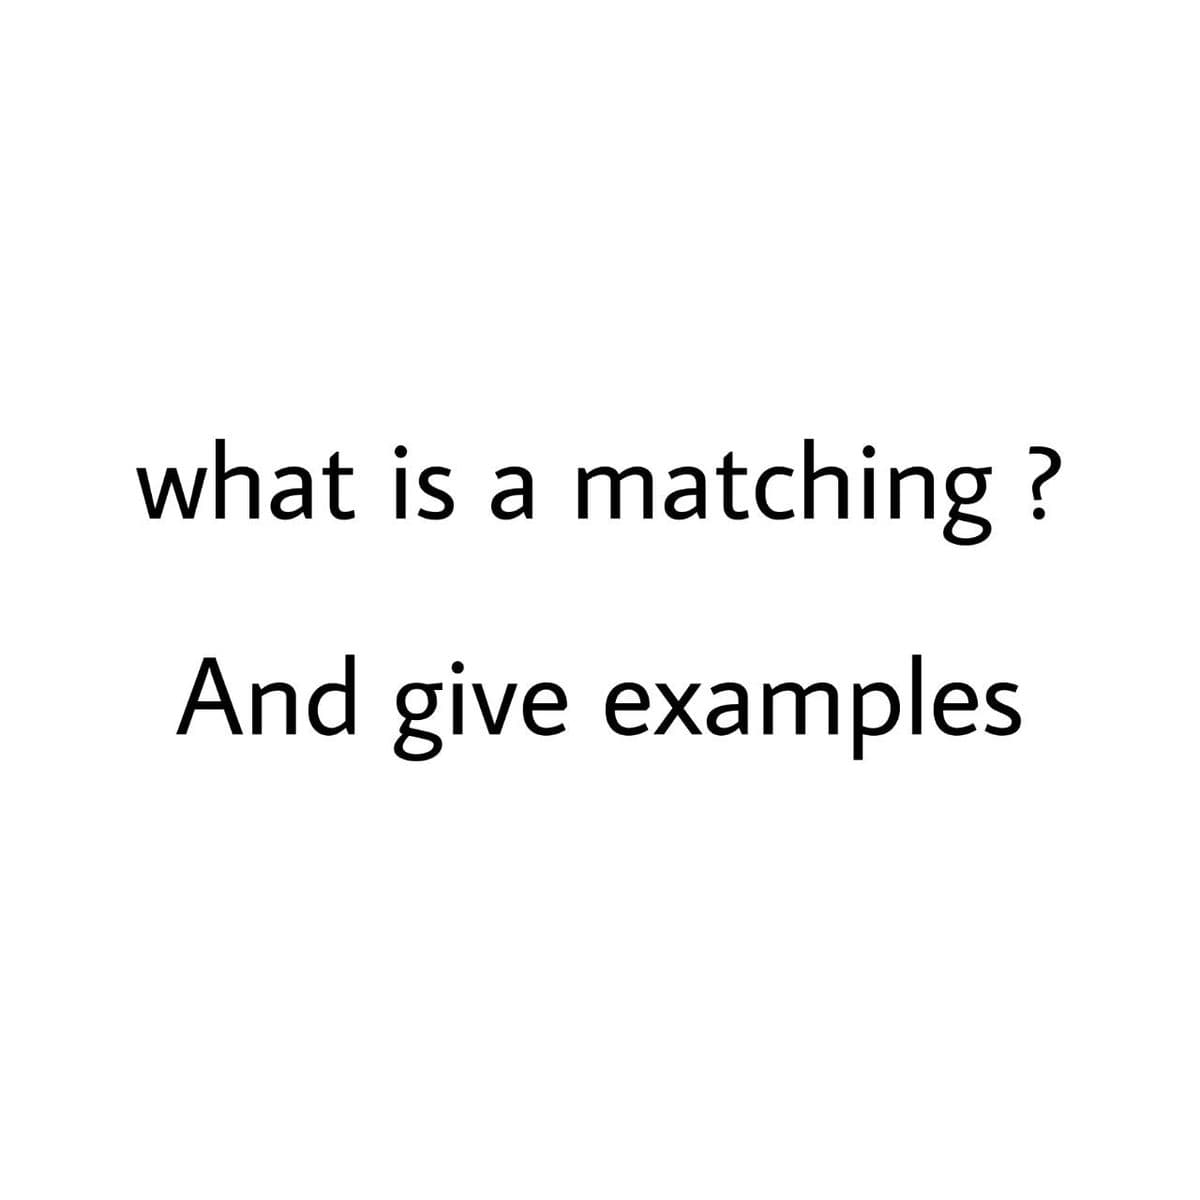 what is a matching?
And give examples
